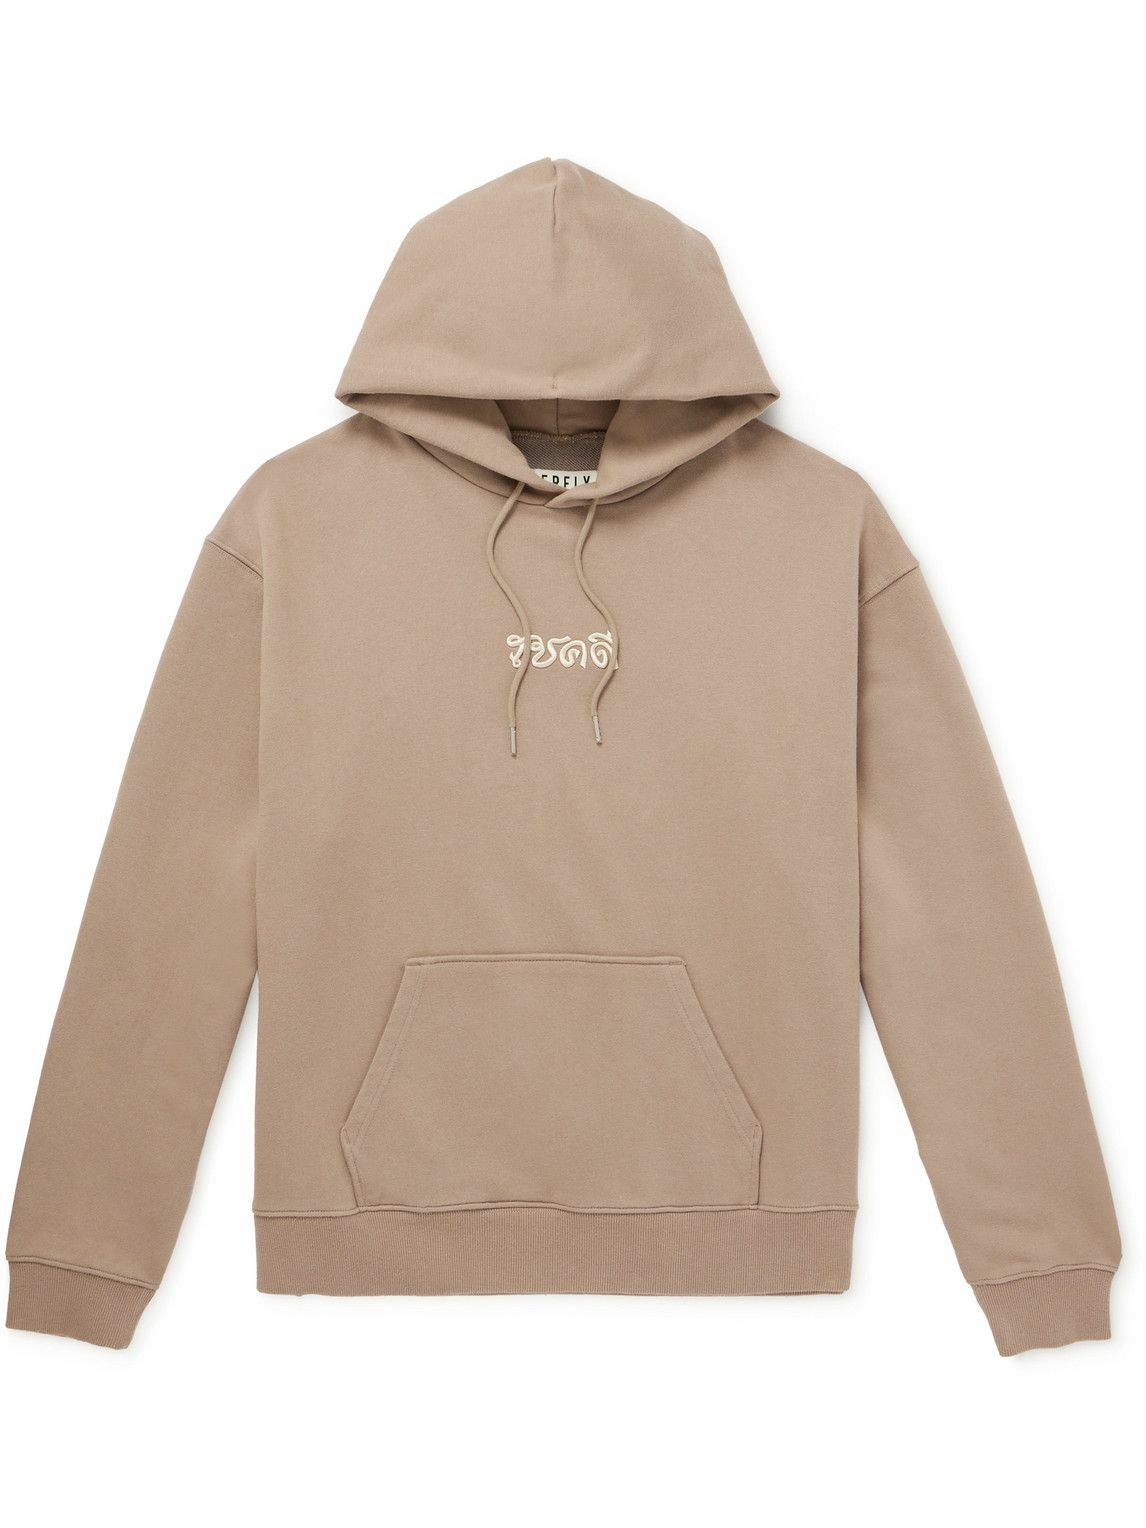 Merely Made - Embroidered Cotton-Blend Jersey Hoodie - Brown